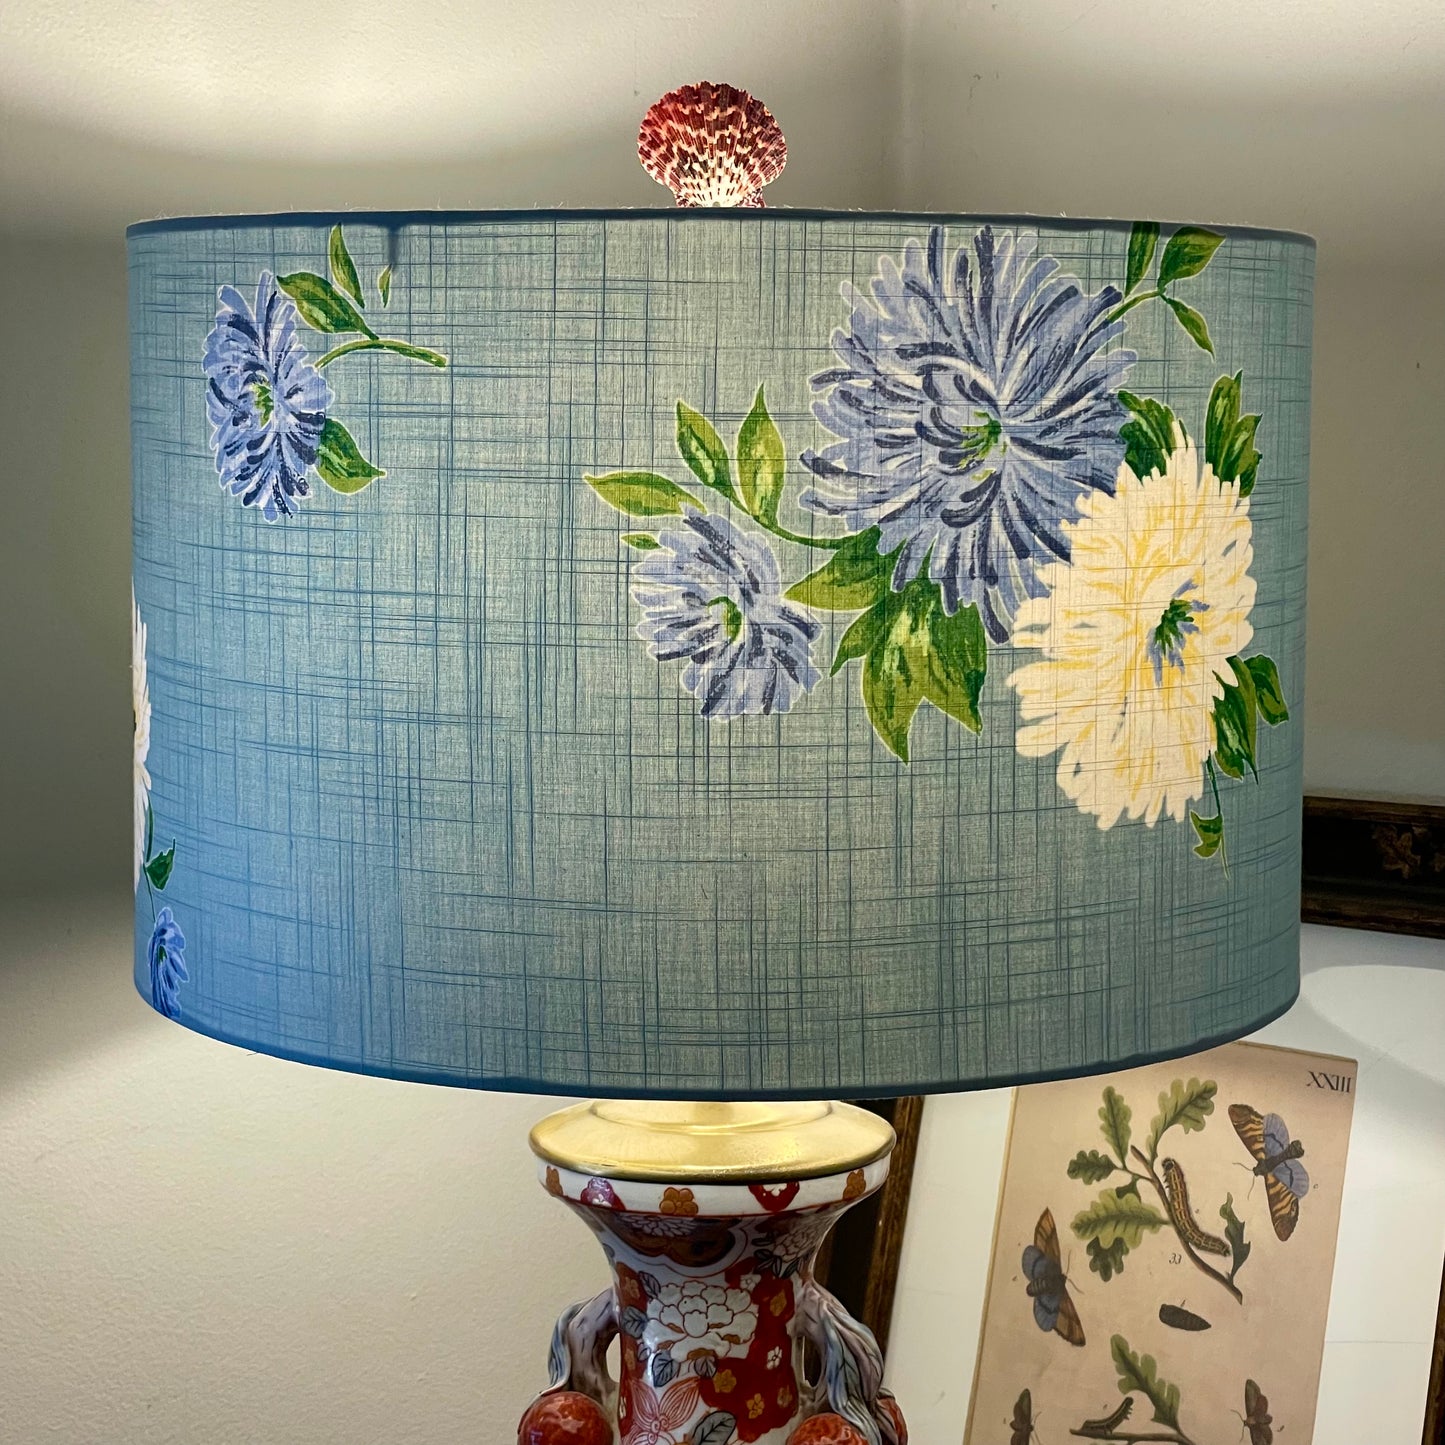 16 Inch Drum Lampshade. Vintage Summer Kimono Fabric from Japan. Cadet Blue with Painterly Blue and Cream Blossoms.